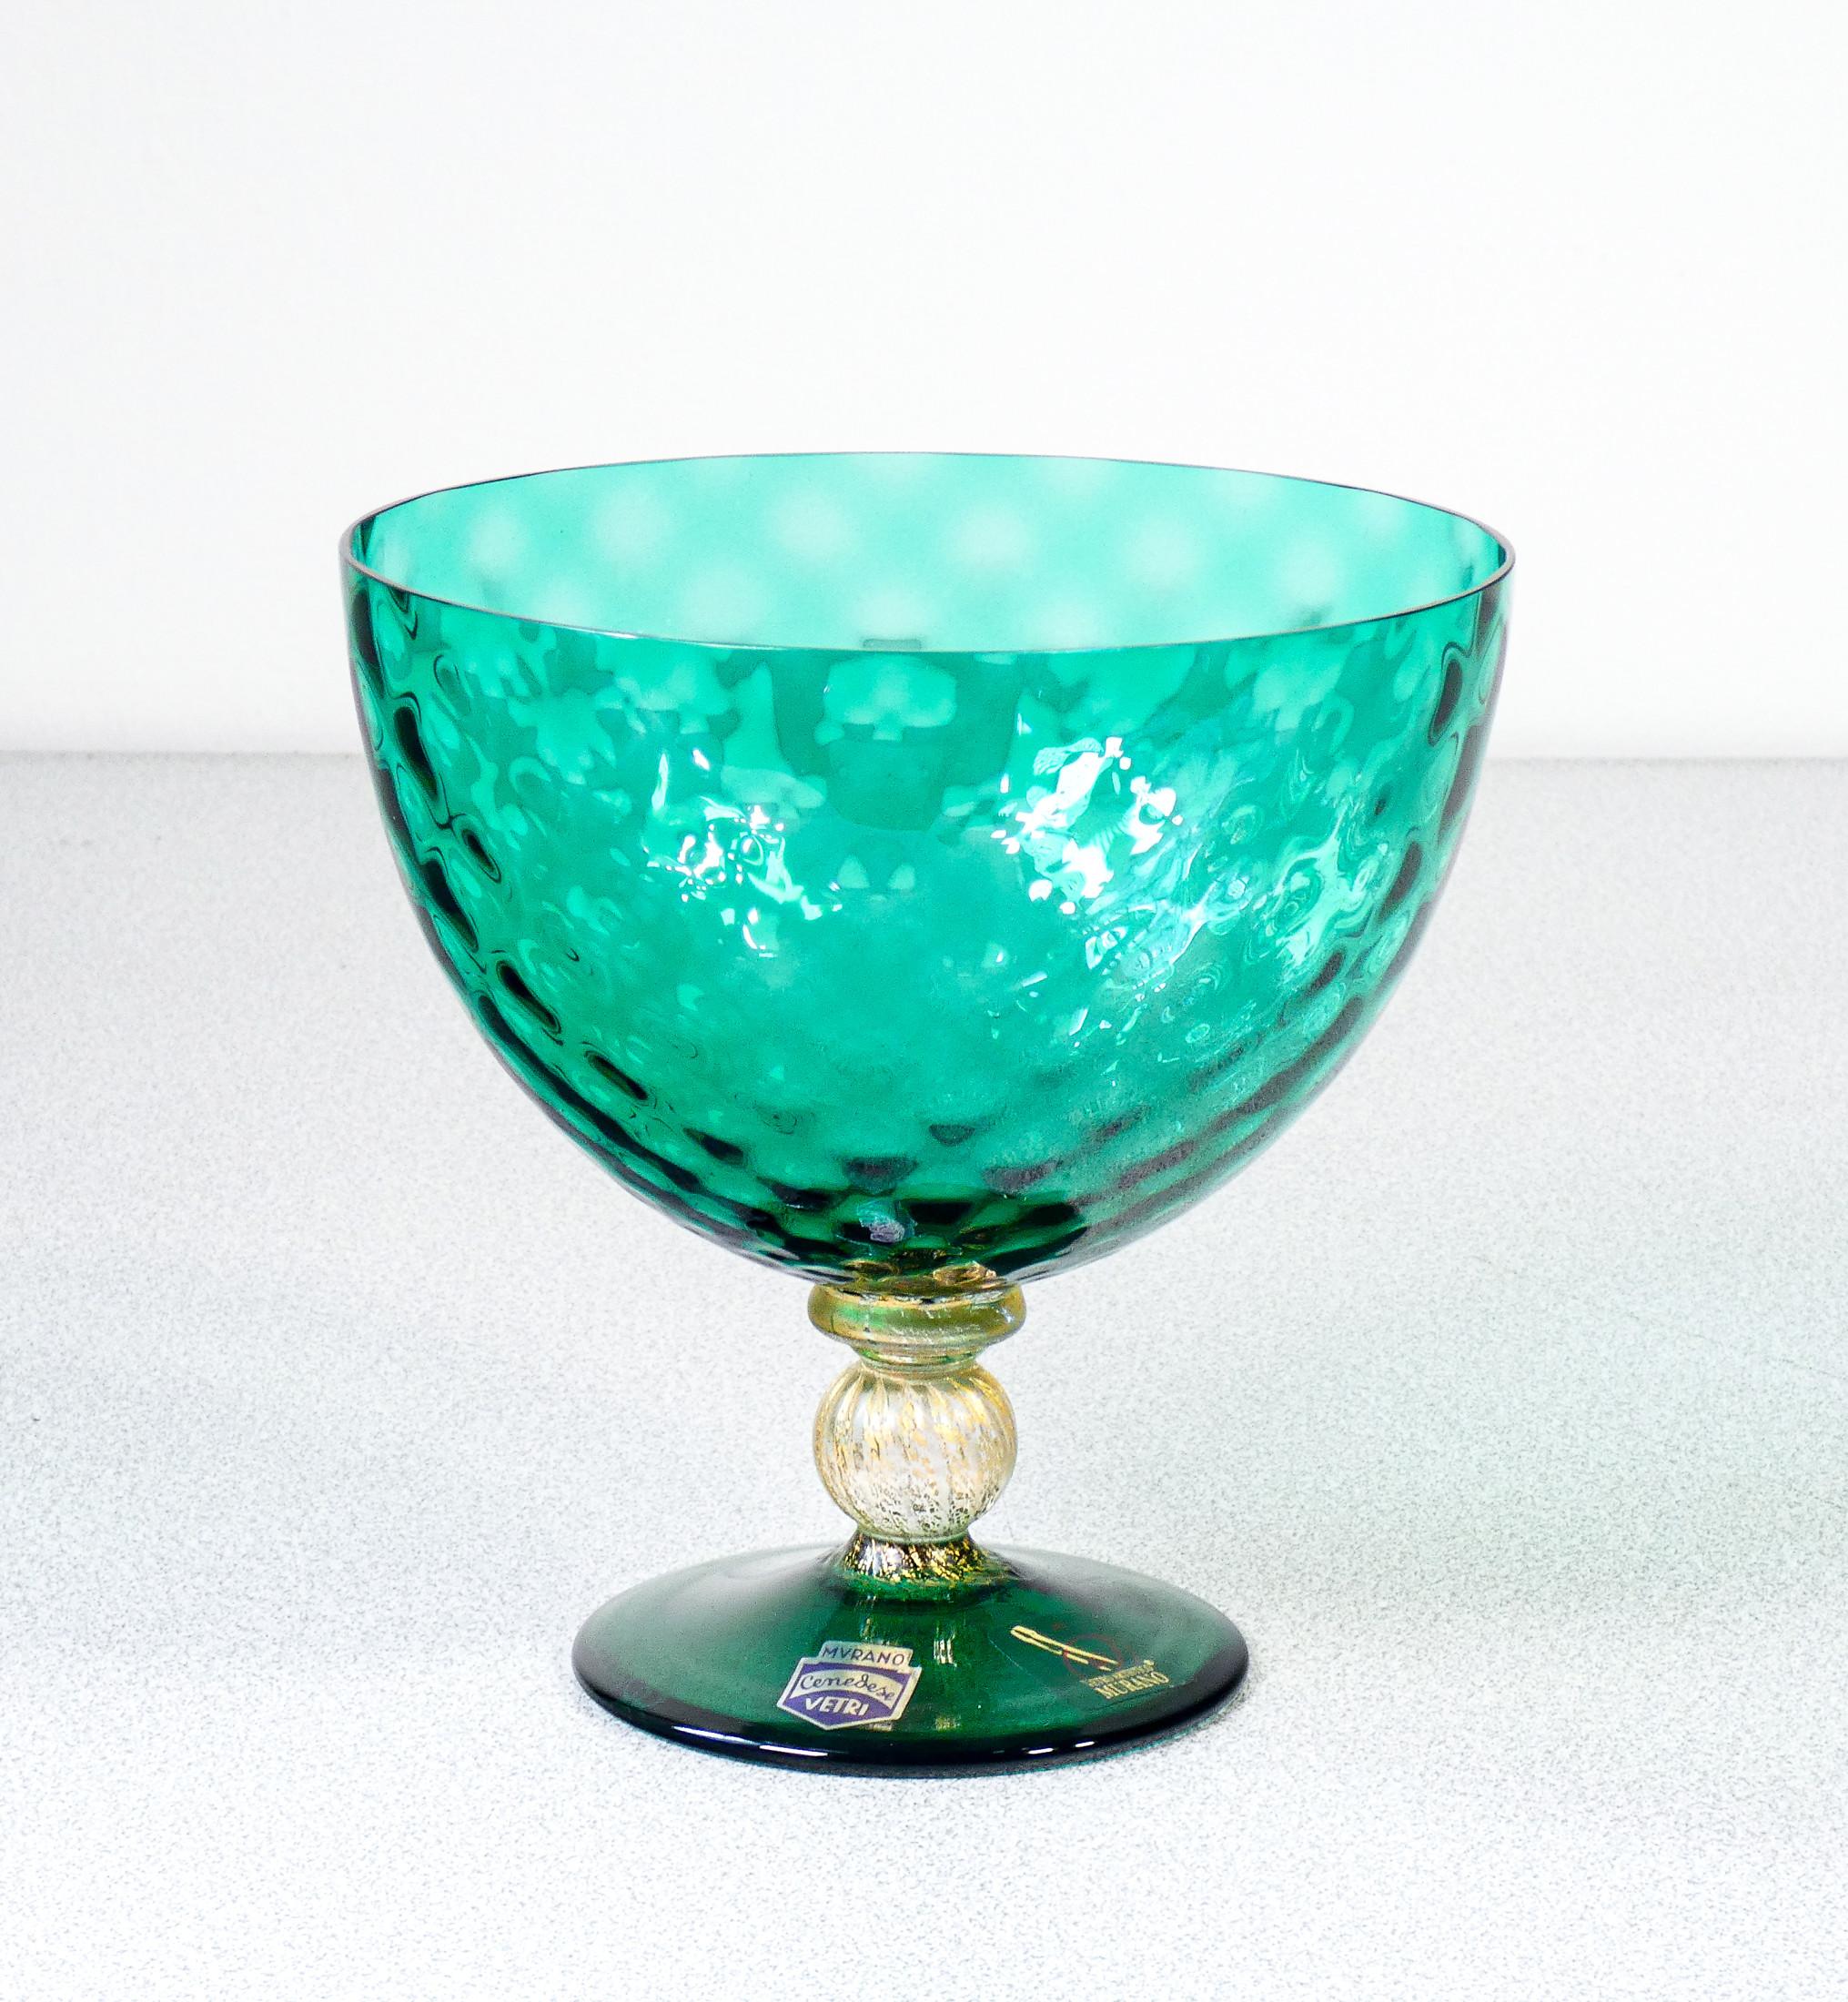 Blown glass cup
polychrome Murano
signed CENEDESE.
Italy, 1940s/50s

ORIGIN
Italy

PERIOD
40s/50s

MARK
CENEDESE
Vetri

MODEL
Cup, vase

MATERIALS
Blown glass
polychrome Murano

DIMENSIONS
Ø 13.2 cm
H 13.5 cm

CONDITIONS
Perfette. Evaluate through